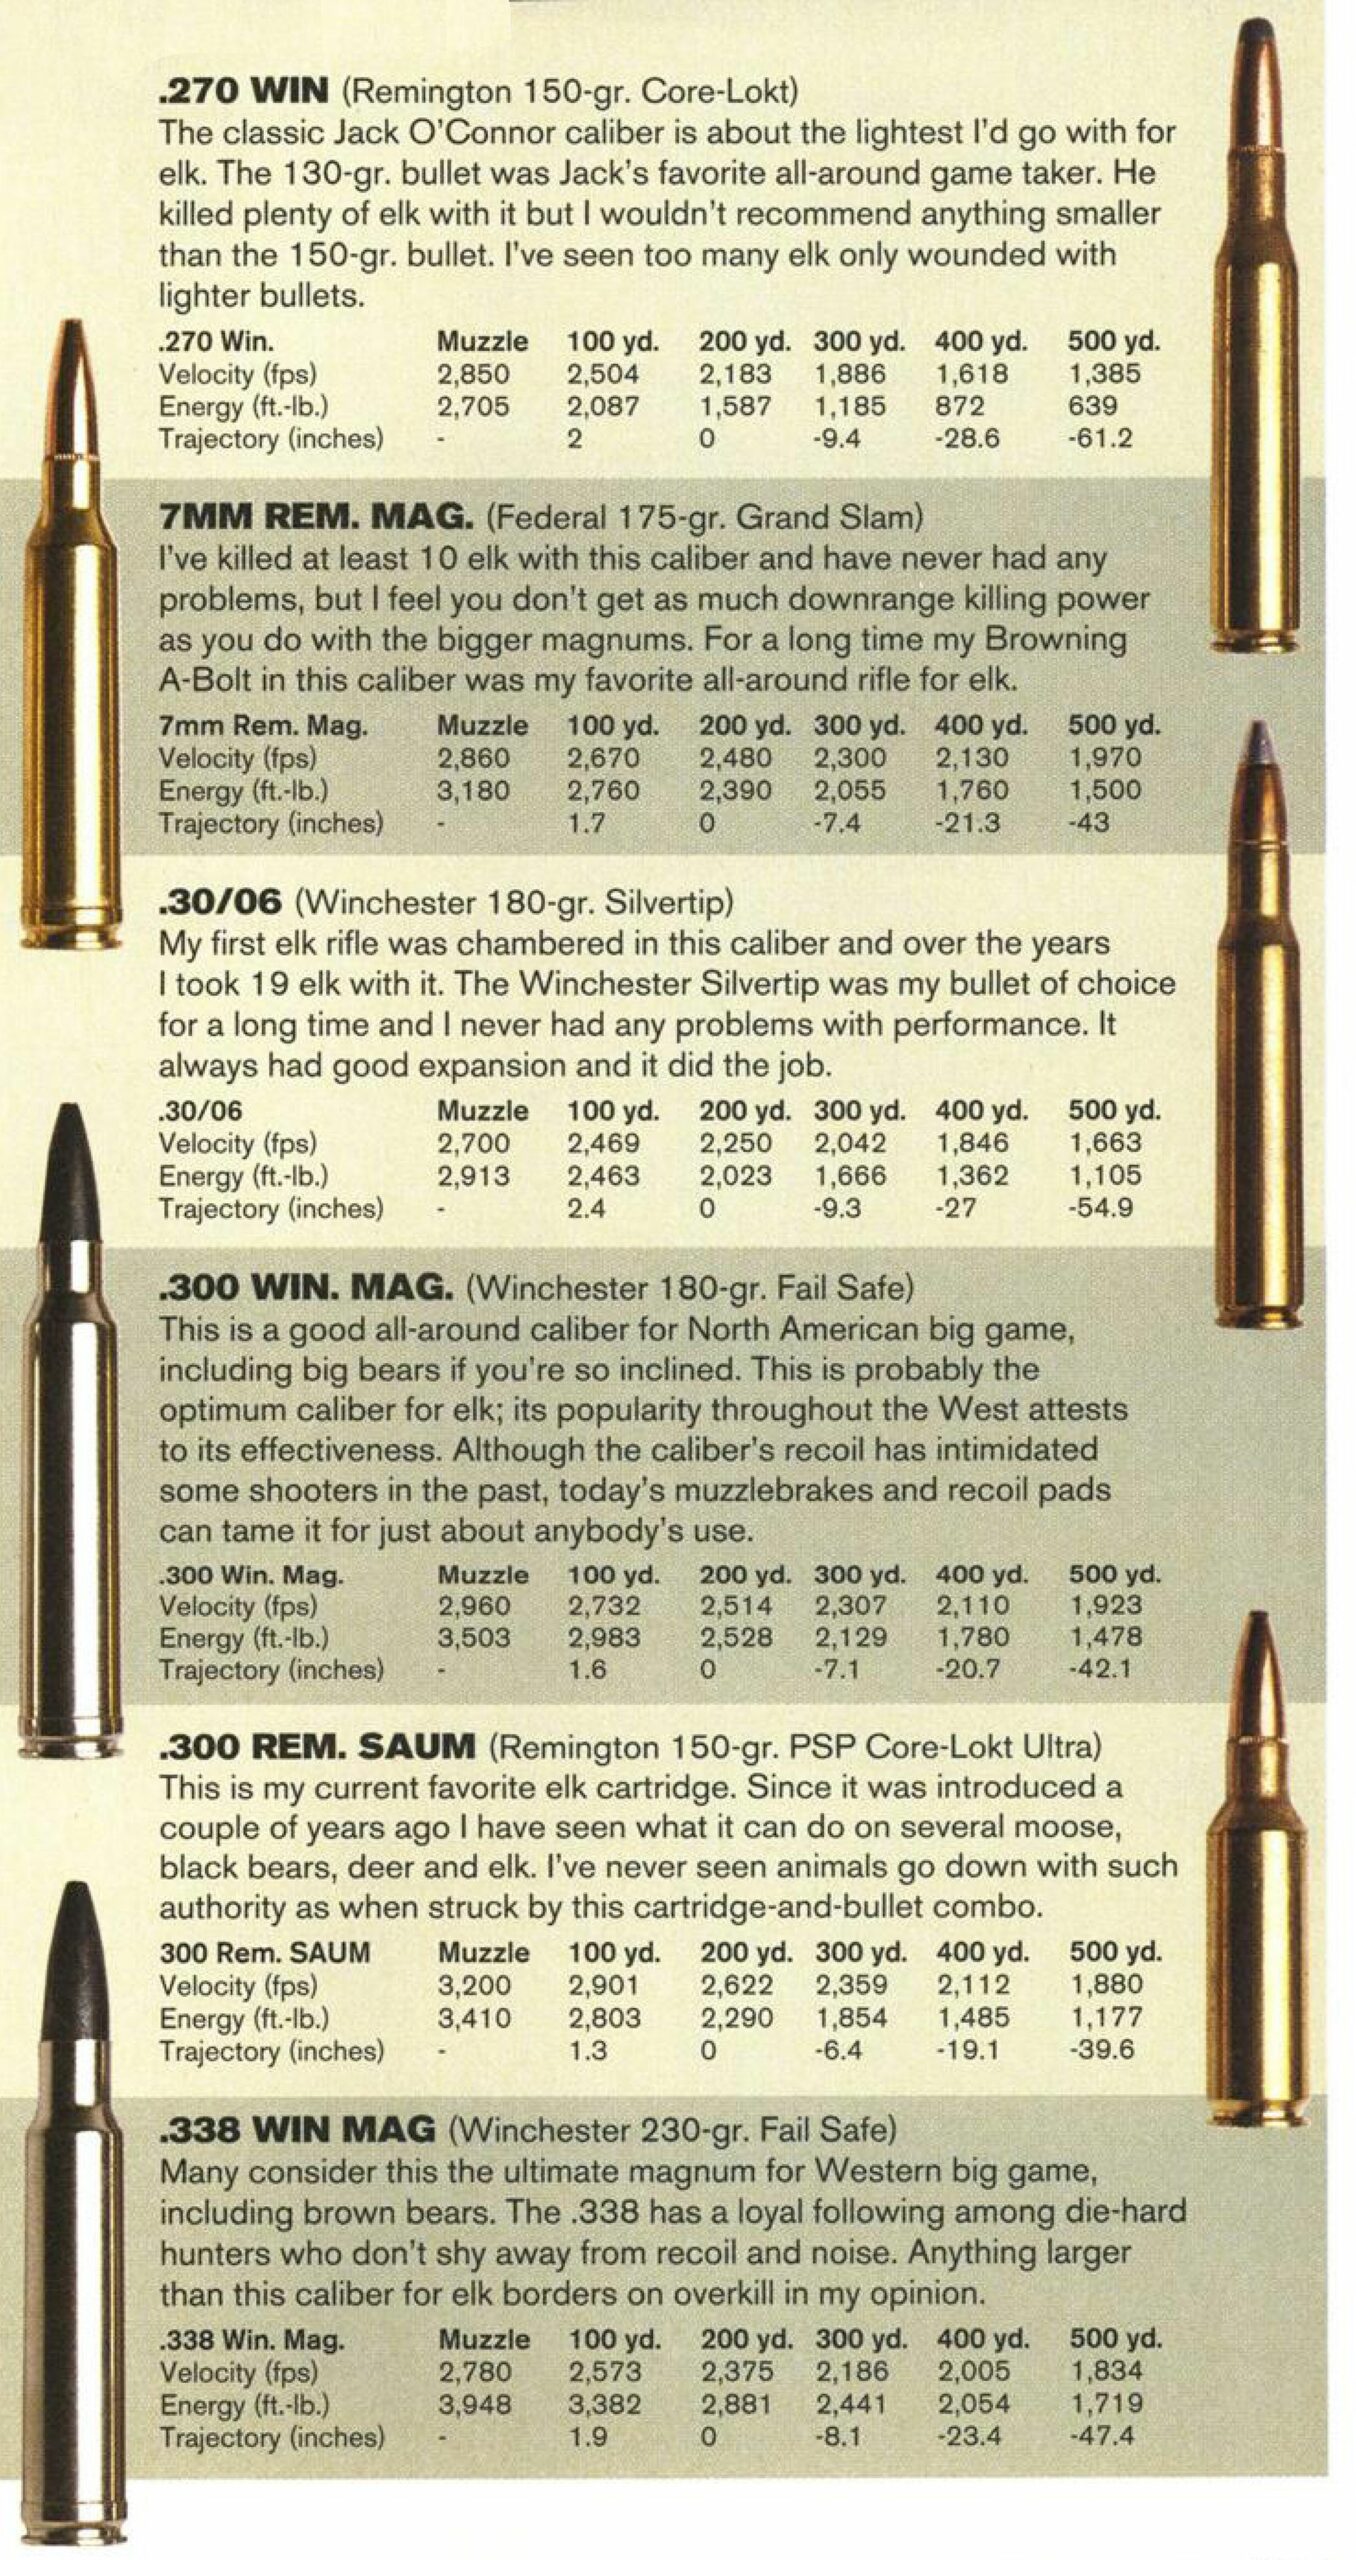 Why are these cartridges good elk rounds?